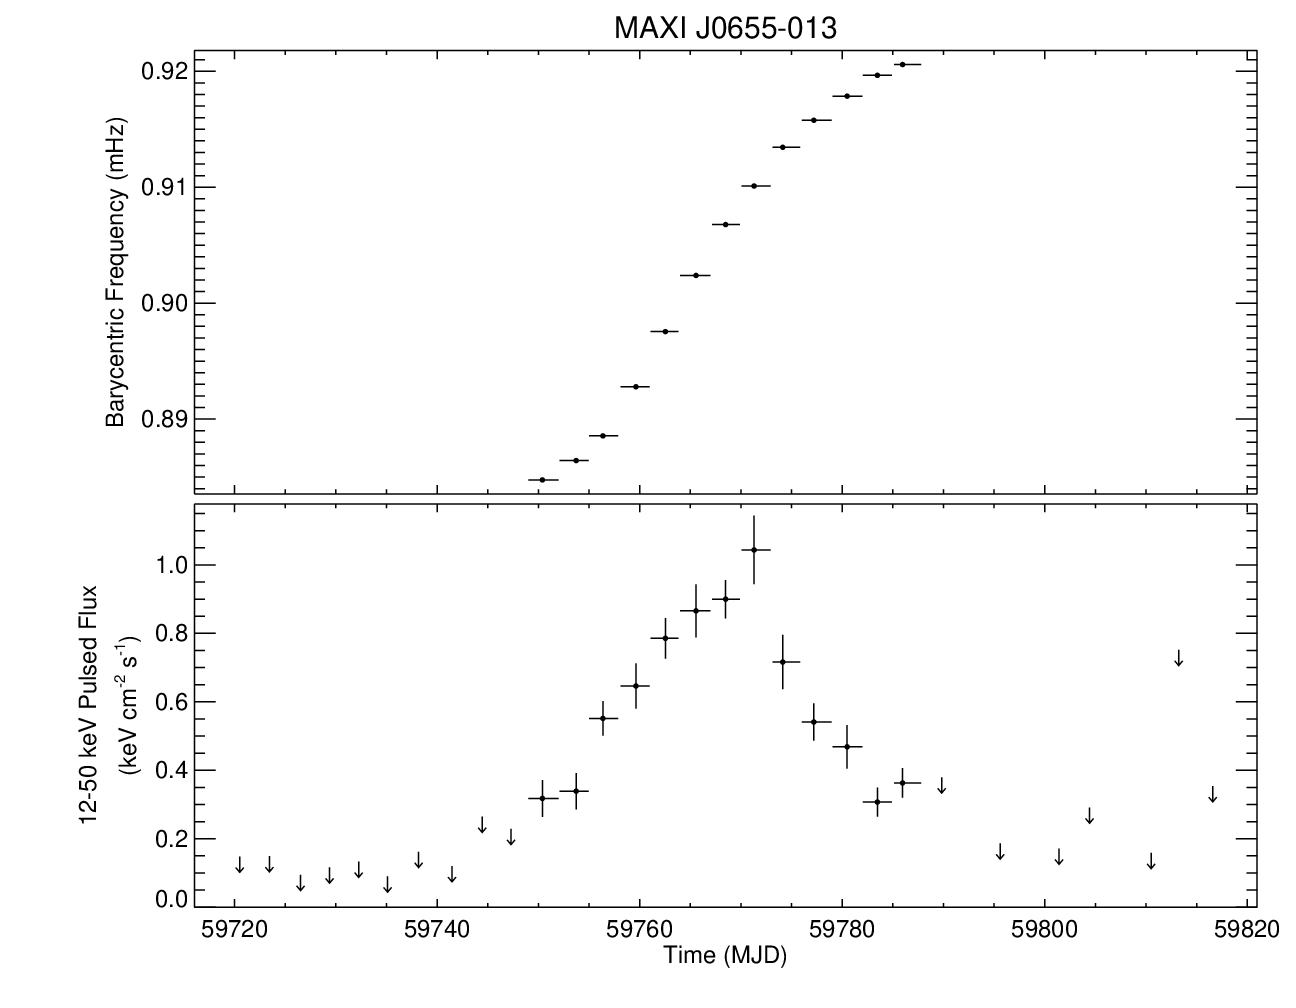 MAXI J0655-013 Short Frequency History